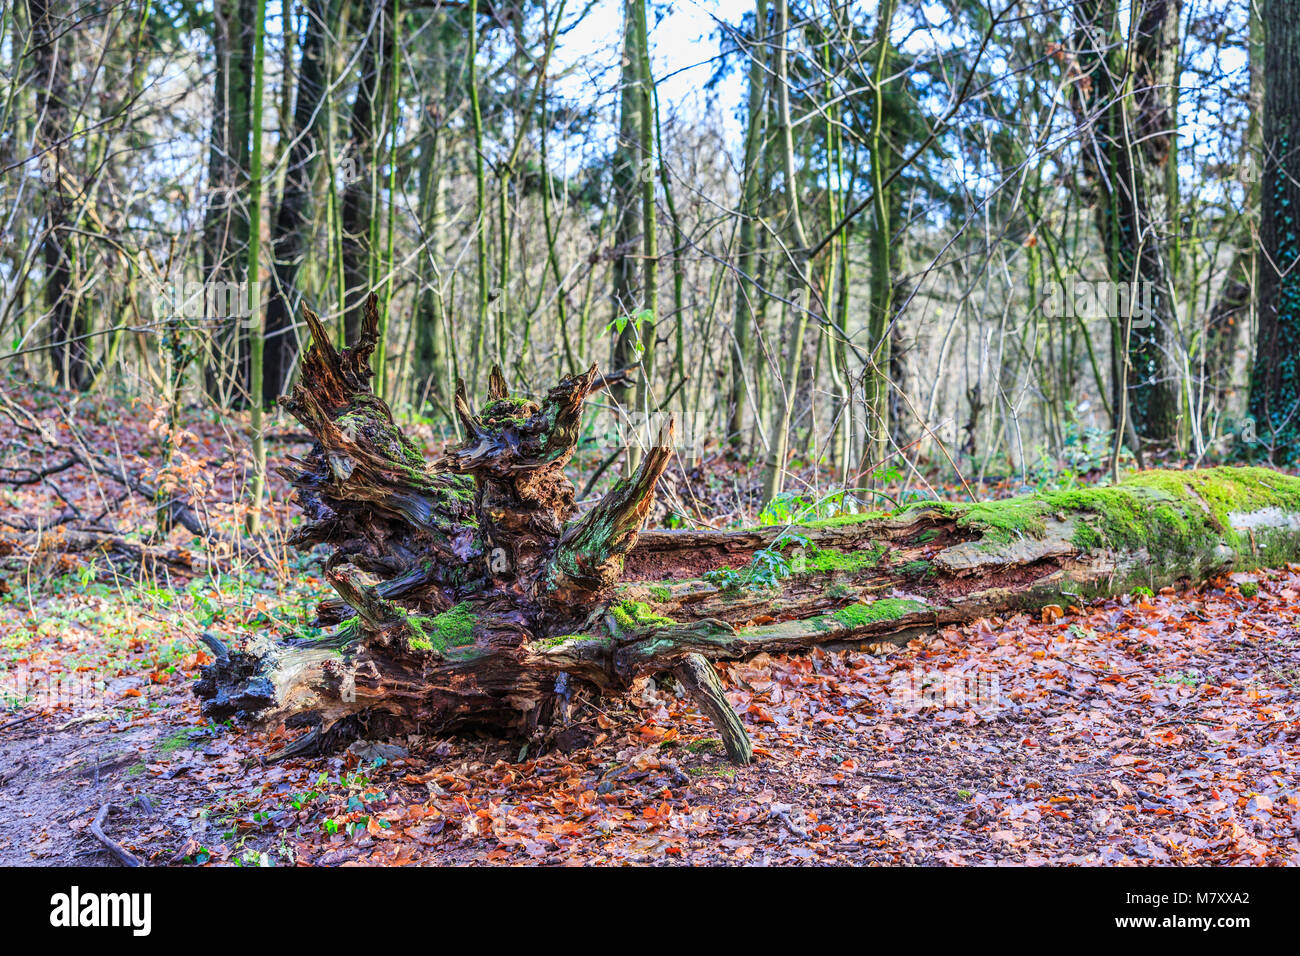 Fallen tree  with thick fluted trunk in a forest is to digest slowly to food for new trees Stock Photo